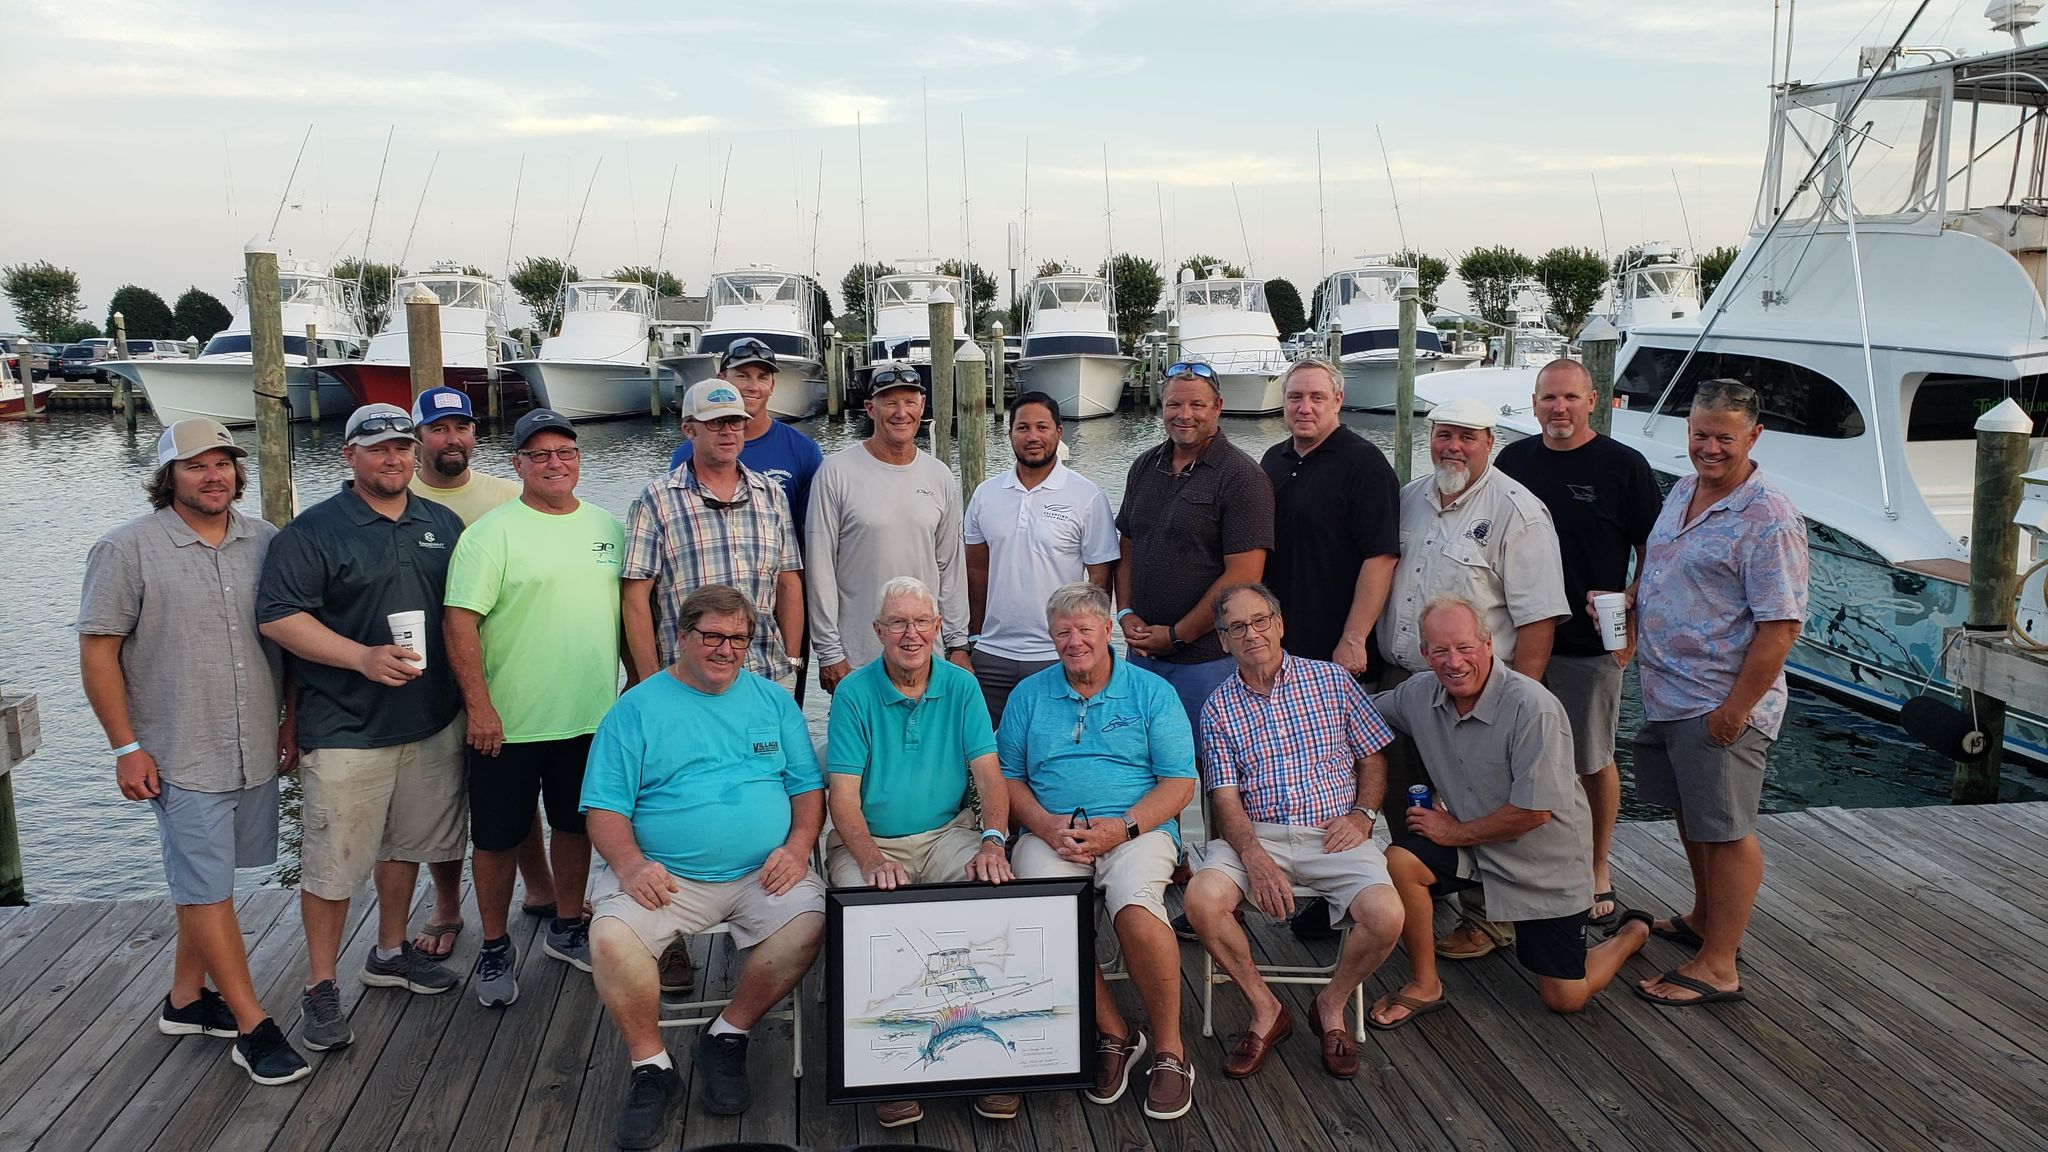 Ernie Foster honored at 19th annual Carolina Boat Builders Tournament